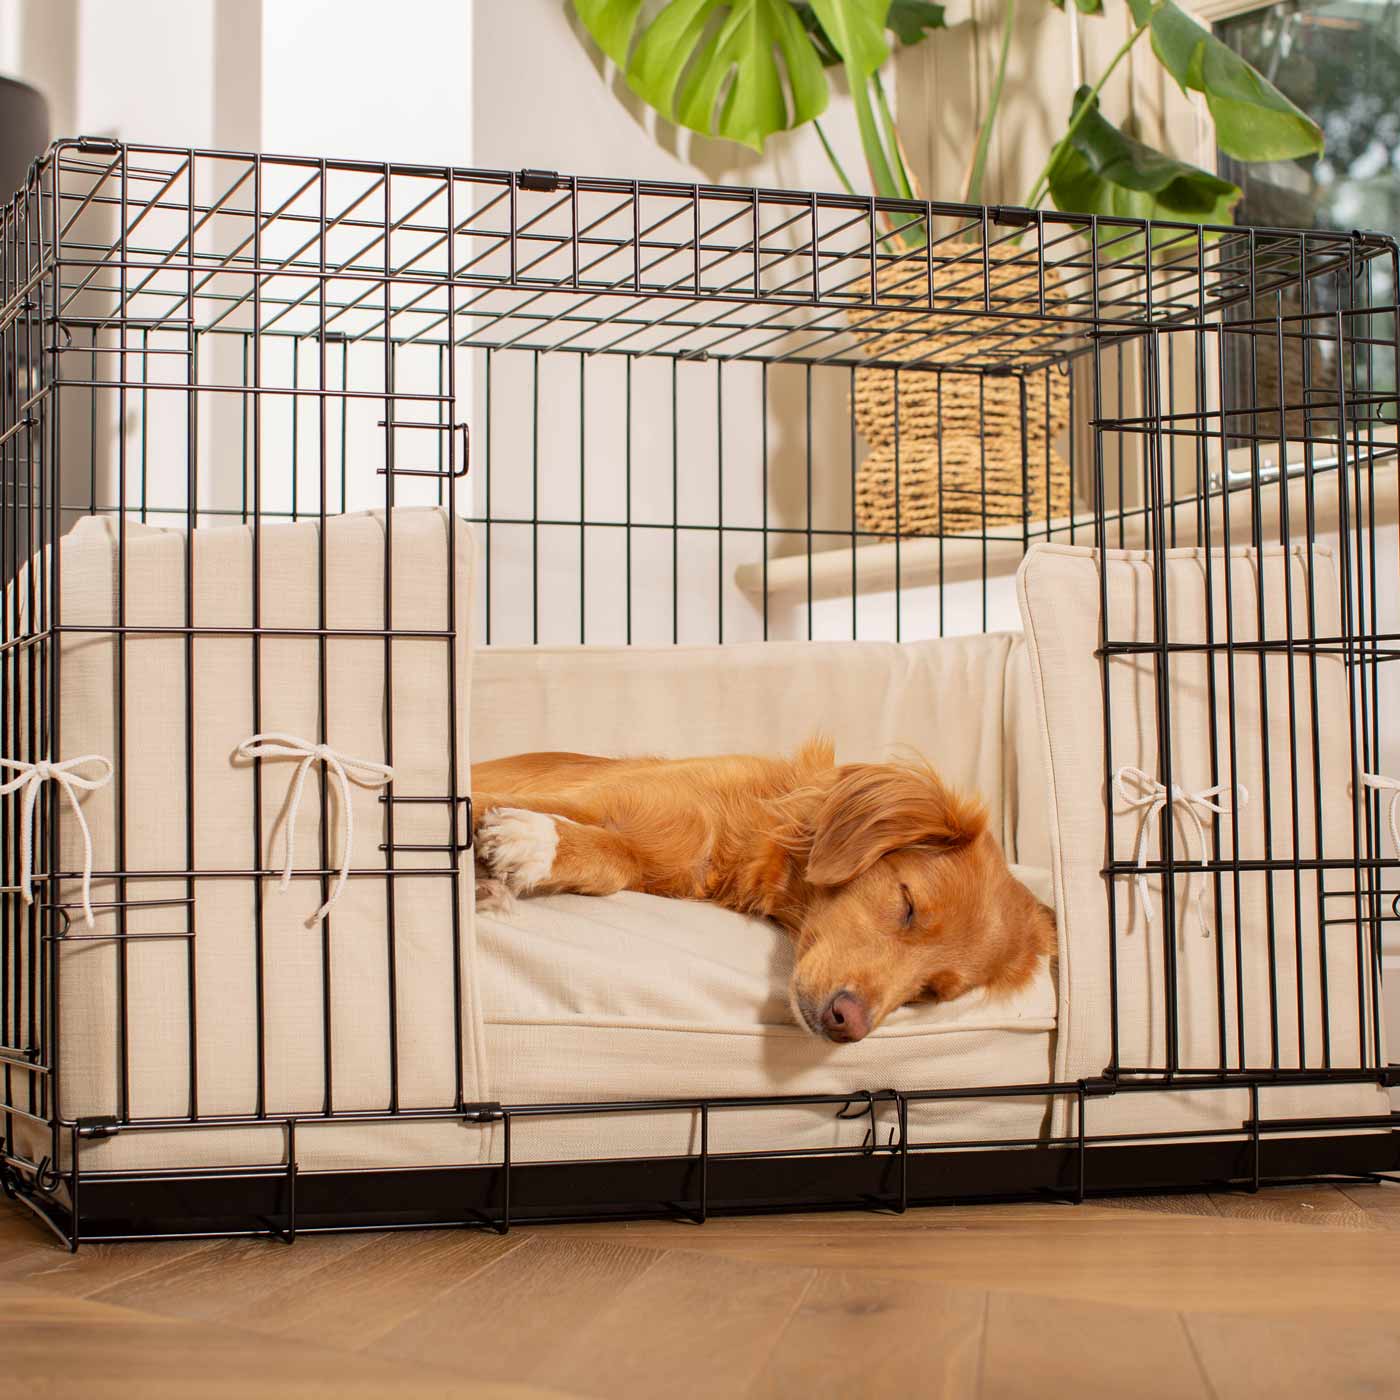 Luxury Dog Cage Bumper, Savanna Bone Cage Bumper Cover The Perfect Dog Cage Accessory, Available To Personalize Now at Lords & Labradors US